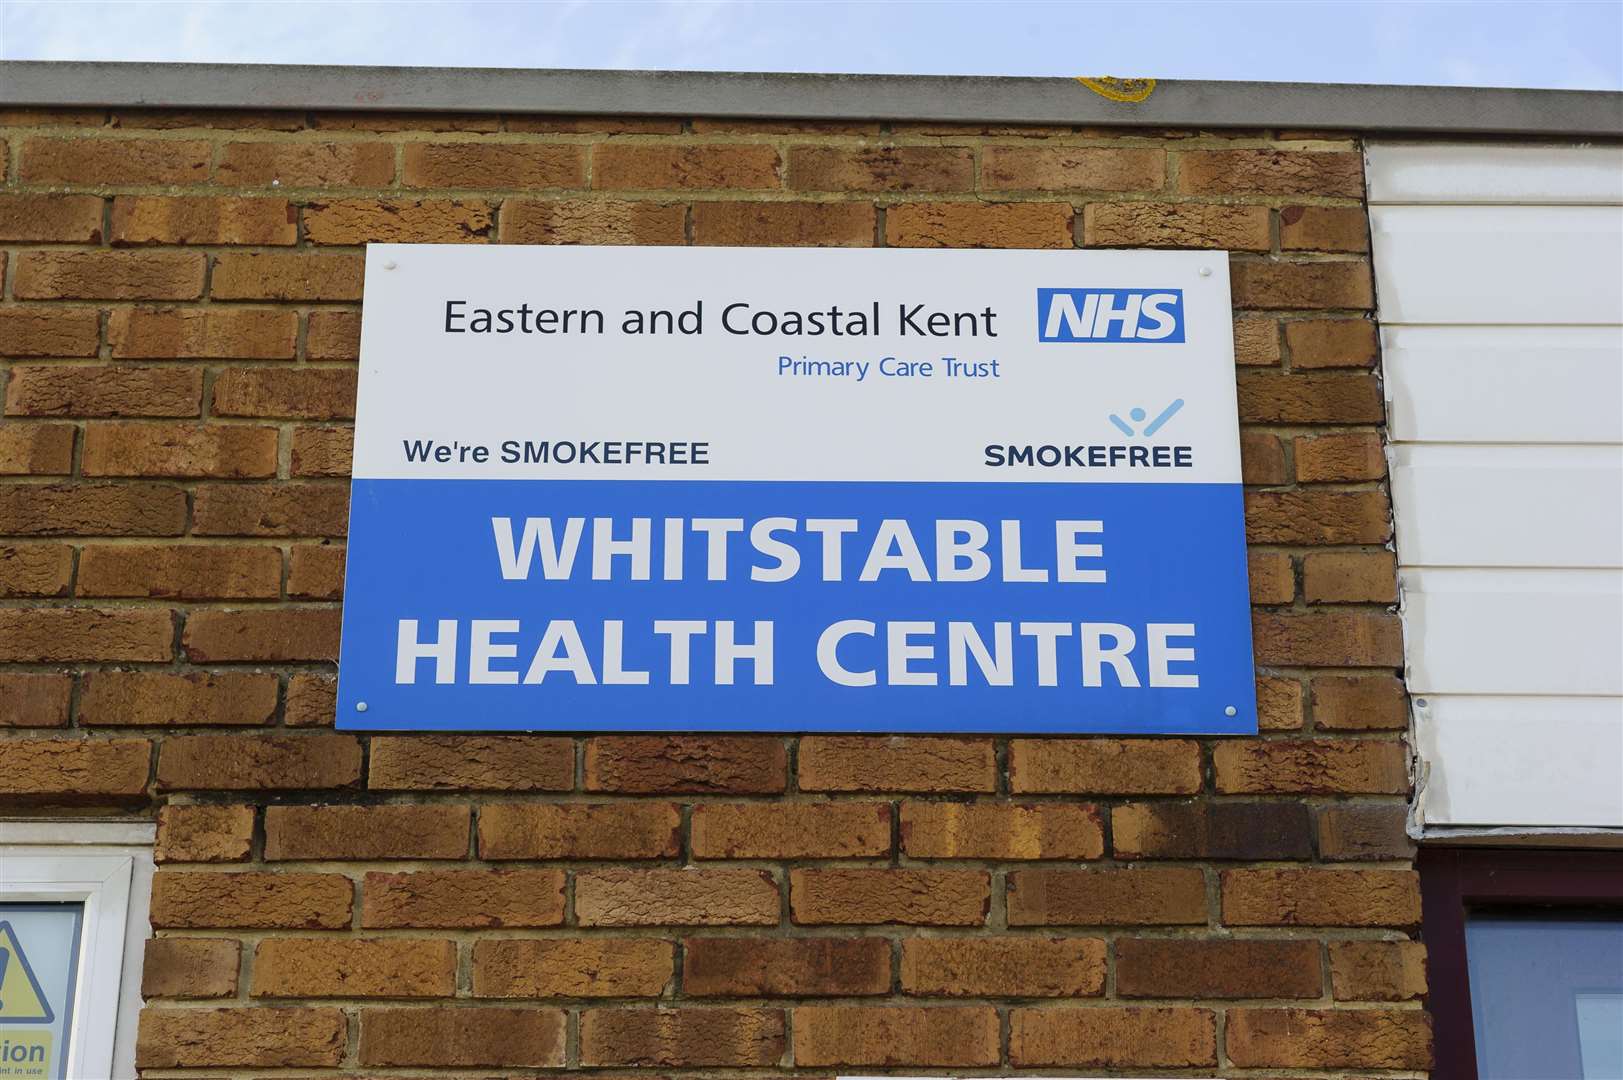 Their appointment at the Whitstable Health Centre overran